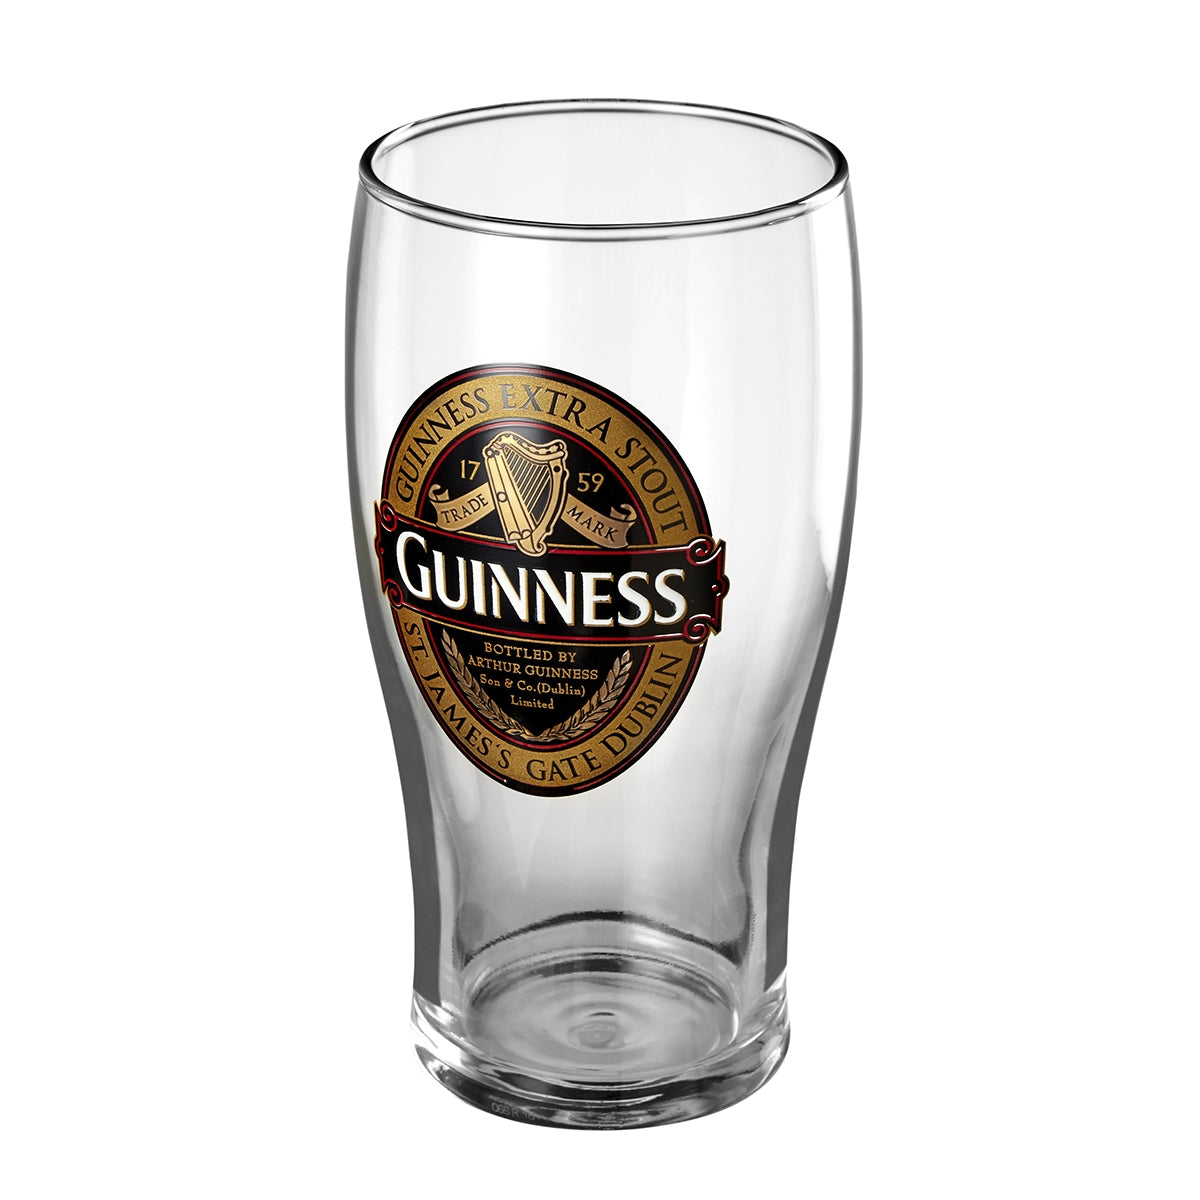 Limited edition Guinness UK Classic Collection Pint Glass - 24 Pack featuring the iconic Extra Stout label.